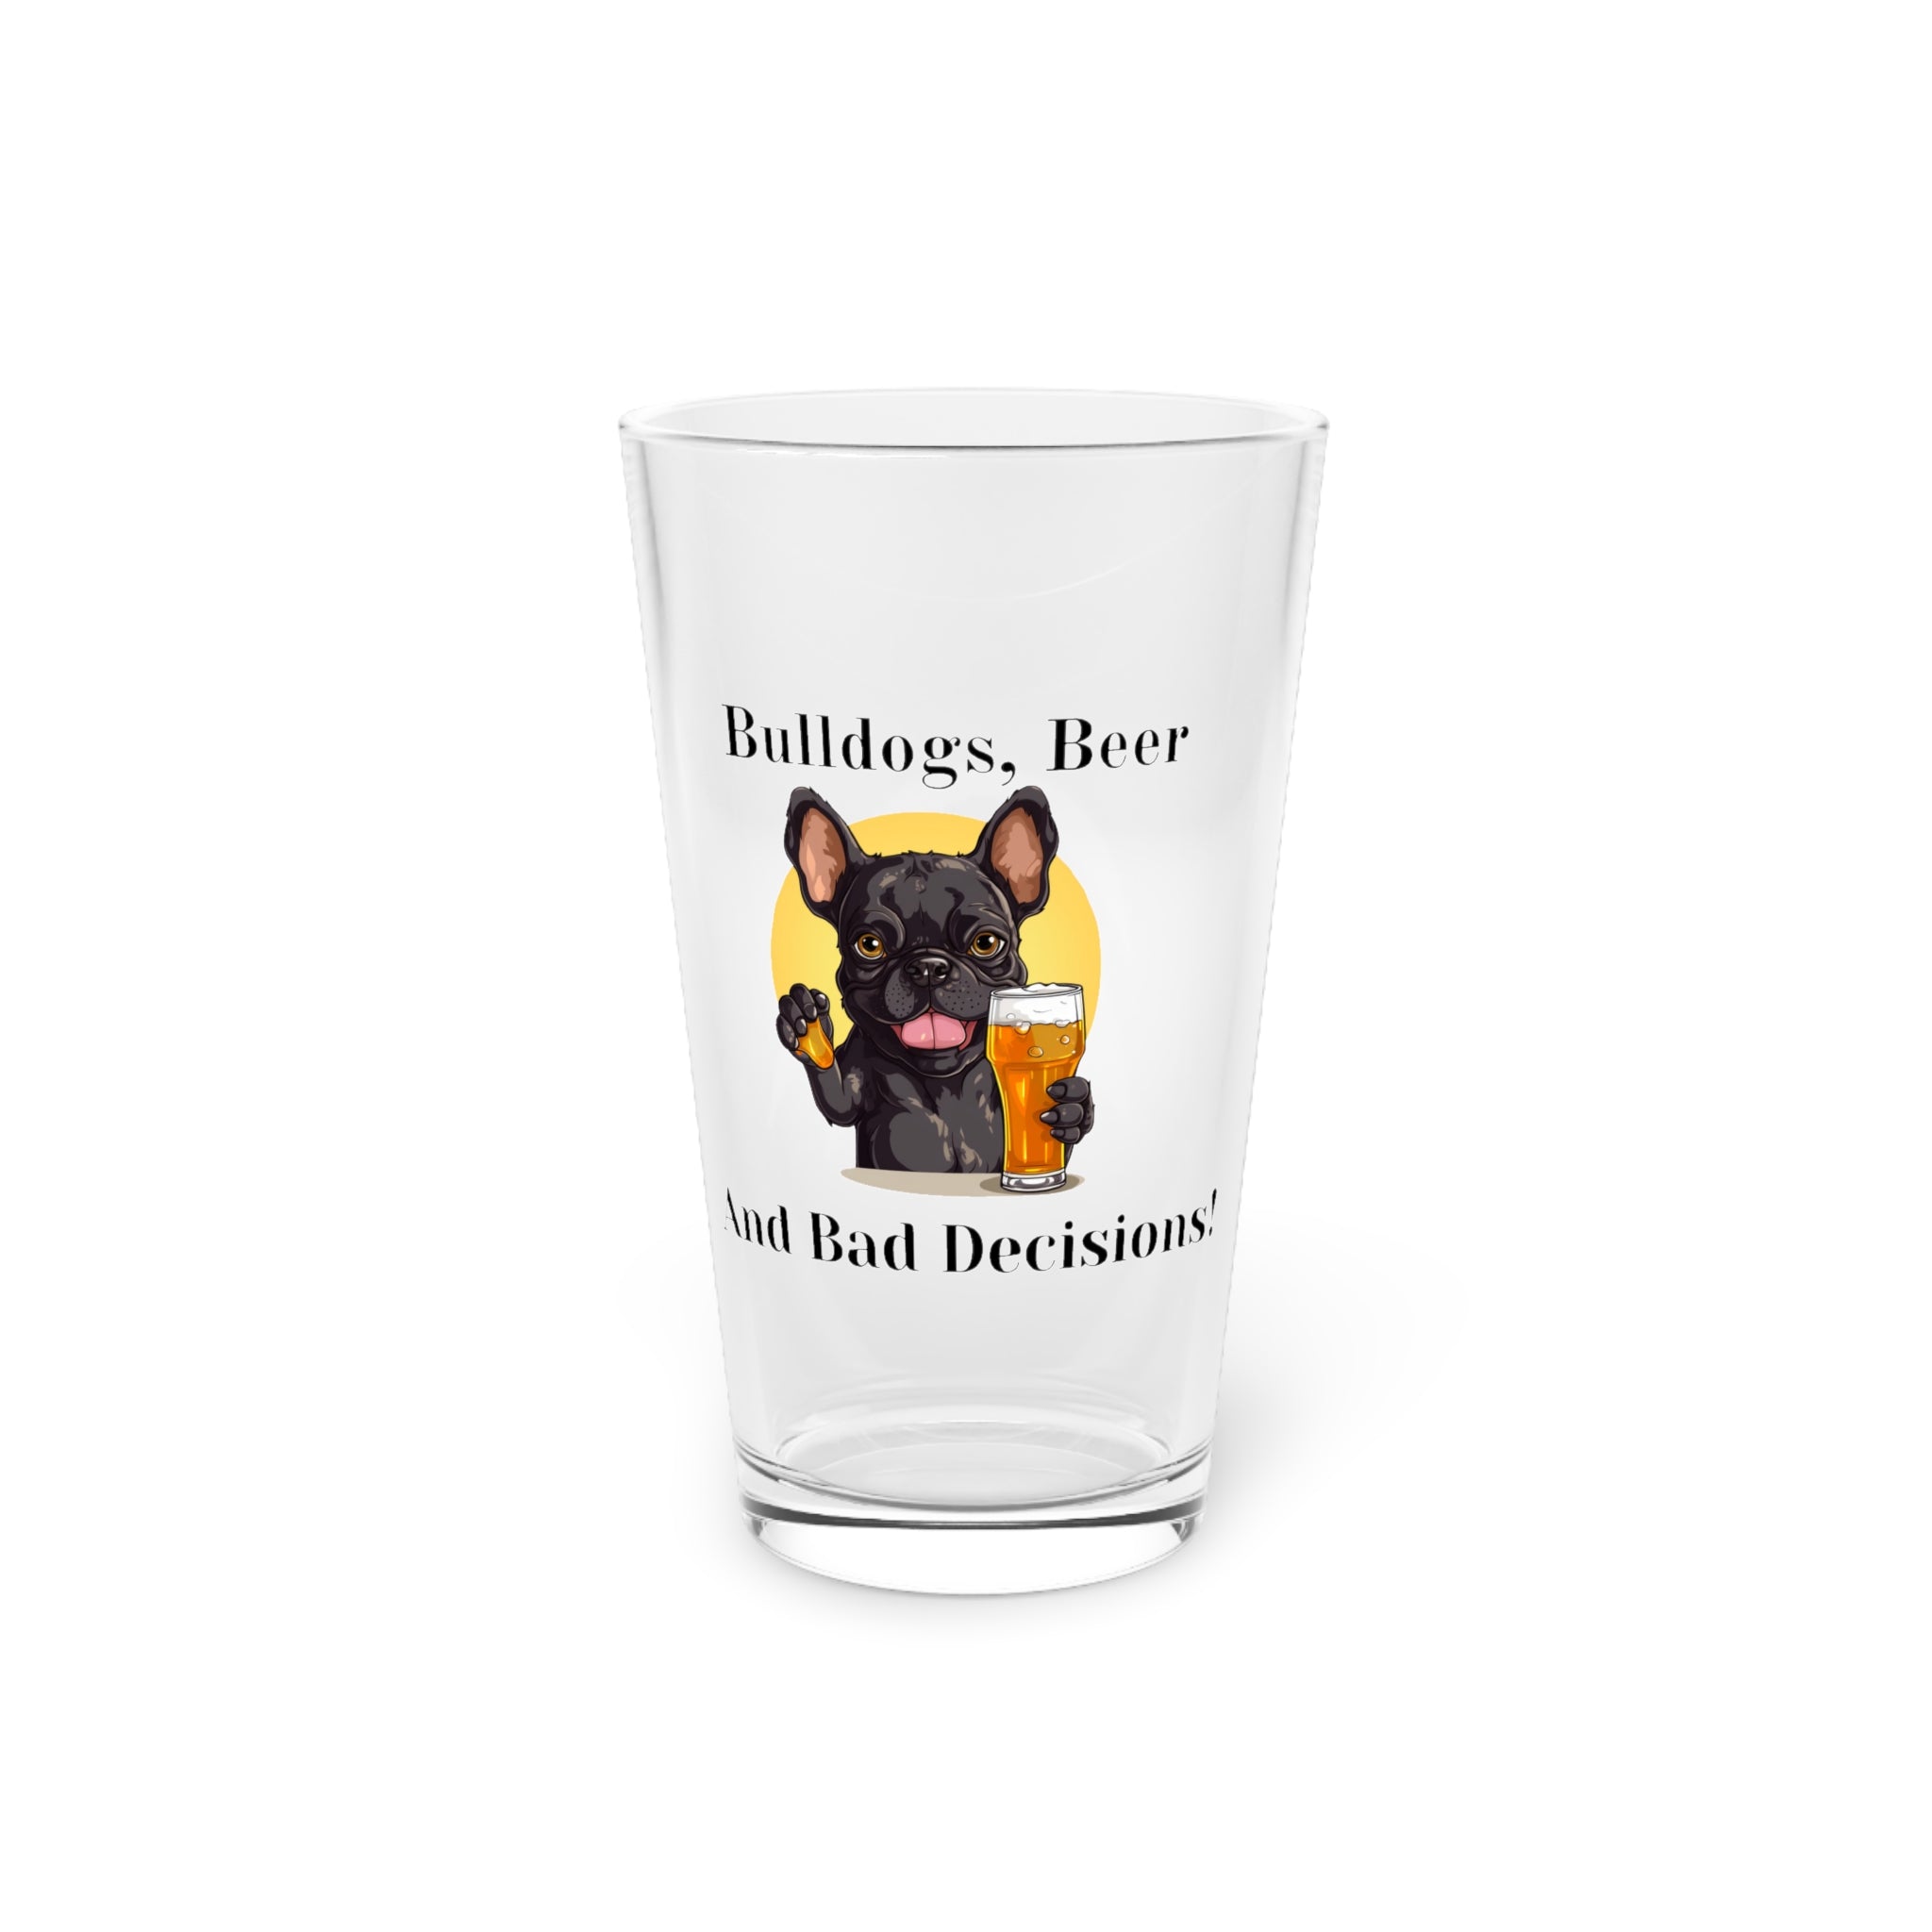 Bulldogs, Beer and Bad Decisions - Tipsy Bully Pint Glass (French/Black)